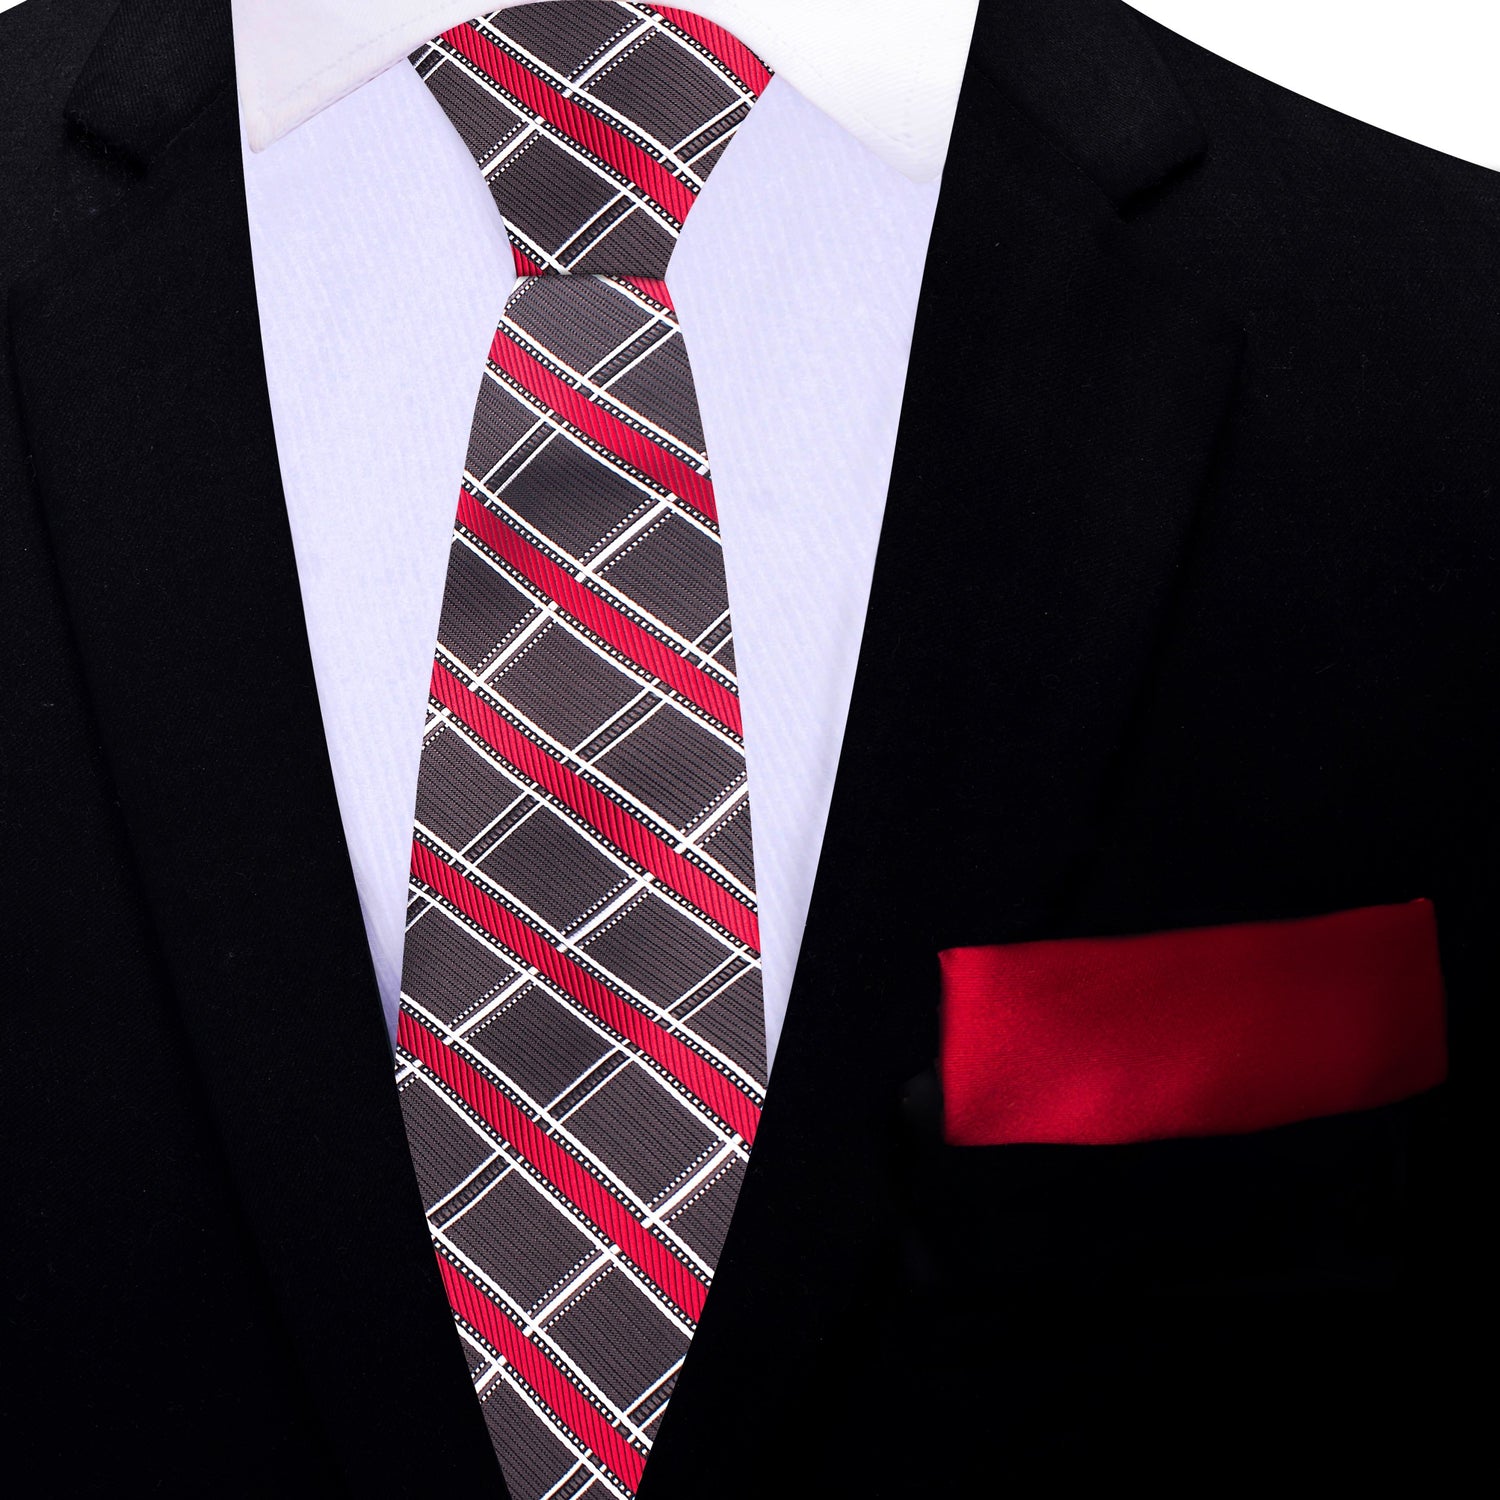 Thin Tie: Greyish Brown, Red, White Plaid Tie and Red Square